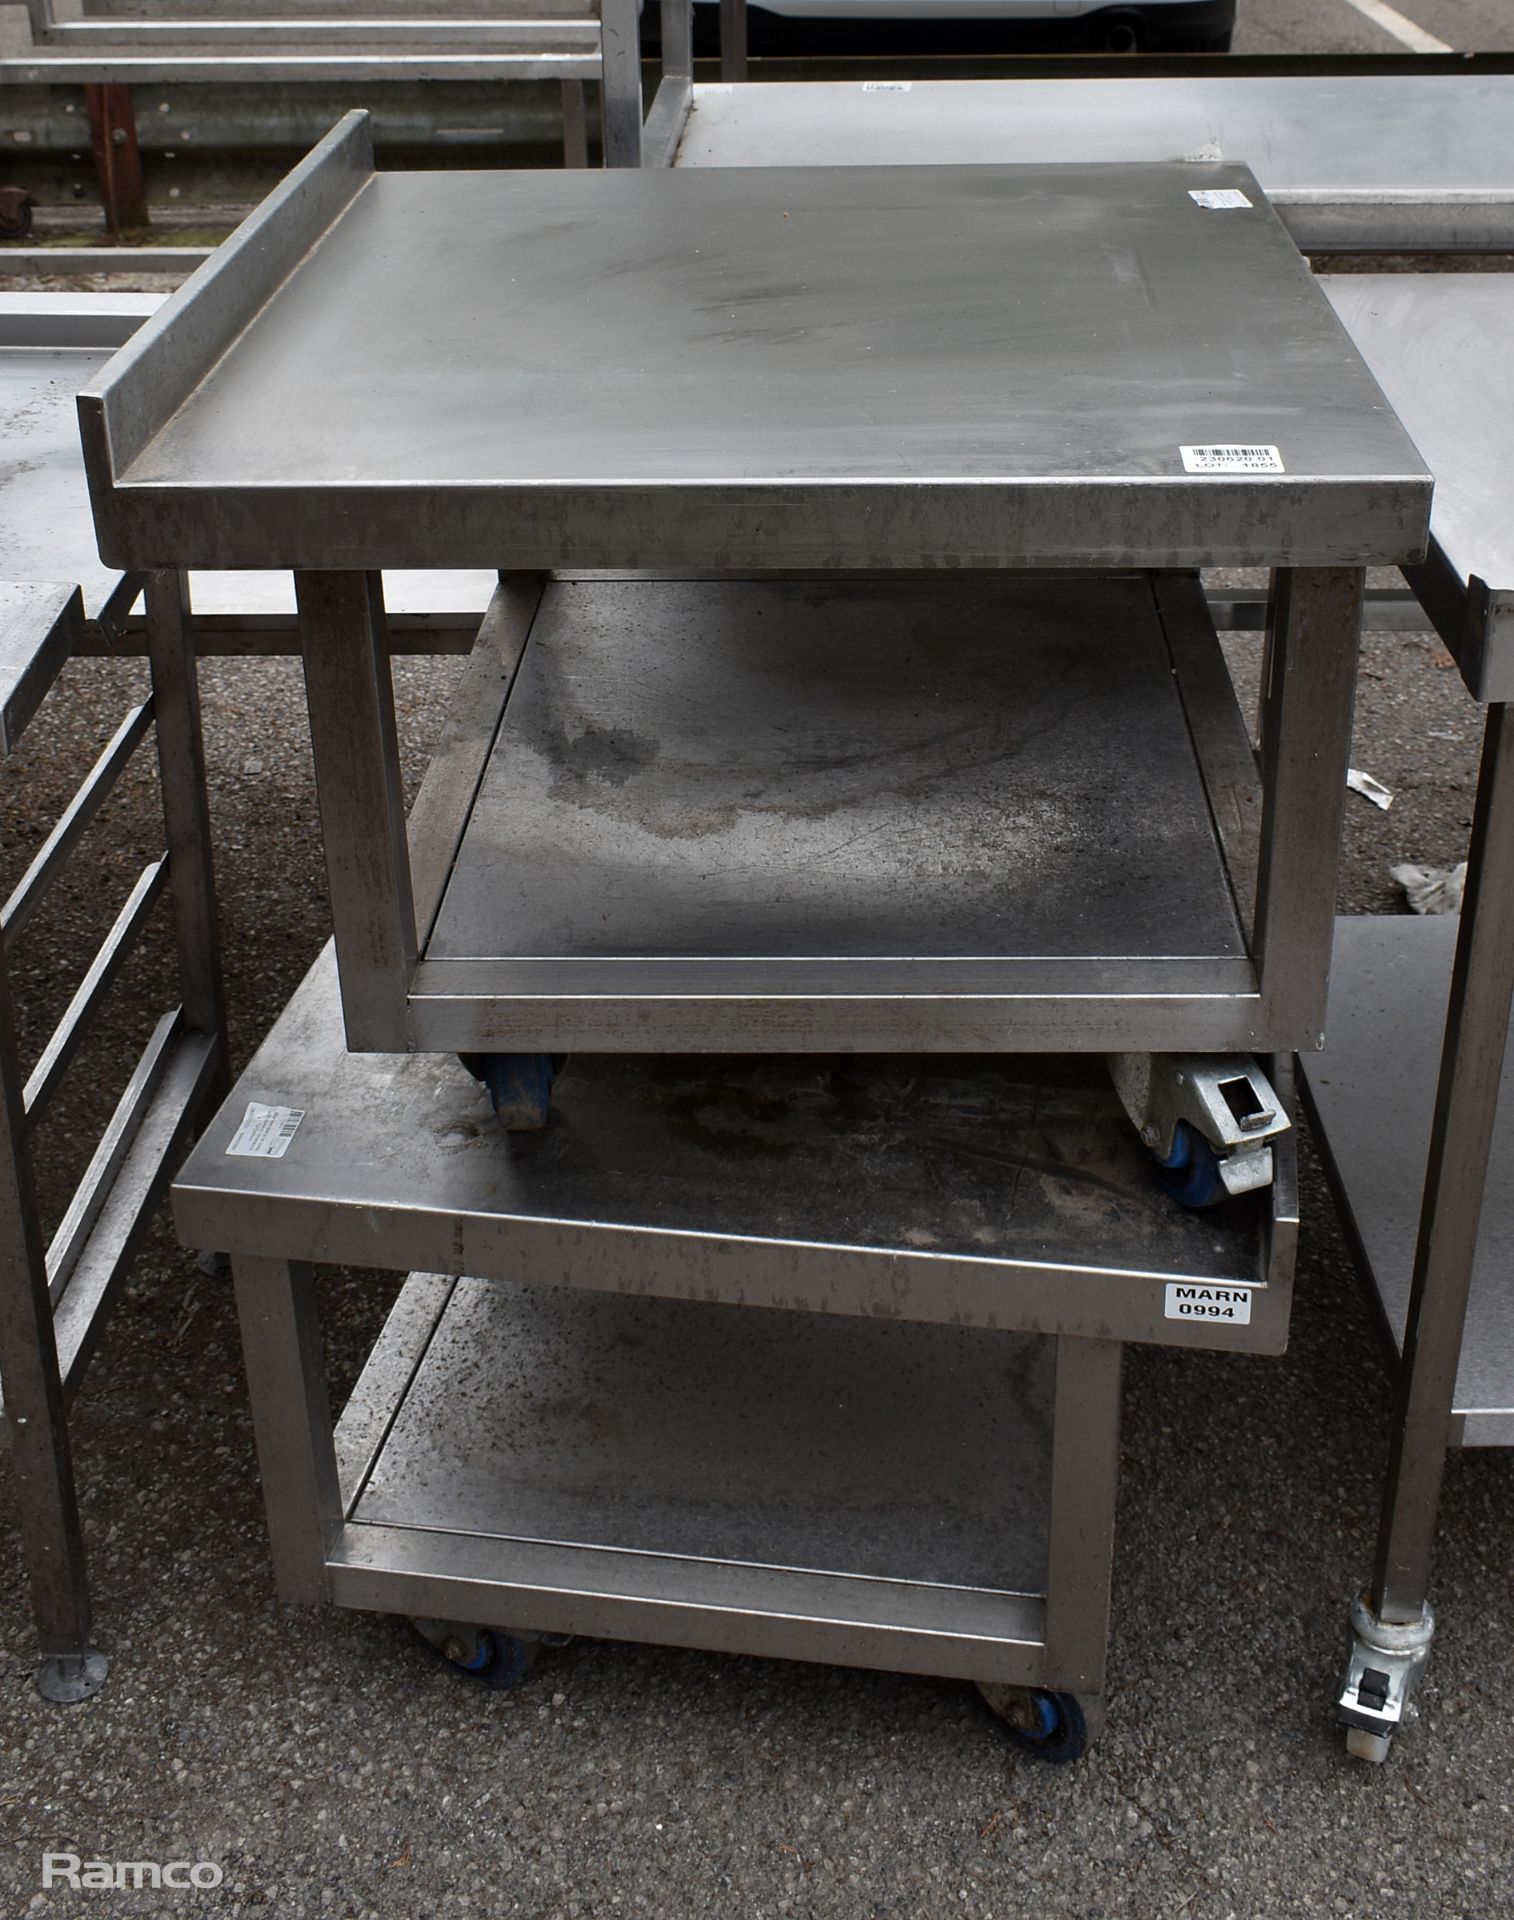 2x Stainless steel 2 tier trolleys with upstand - dimensions: 700 x 700 x 550mm